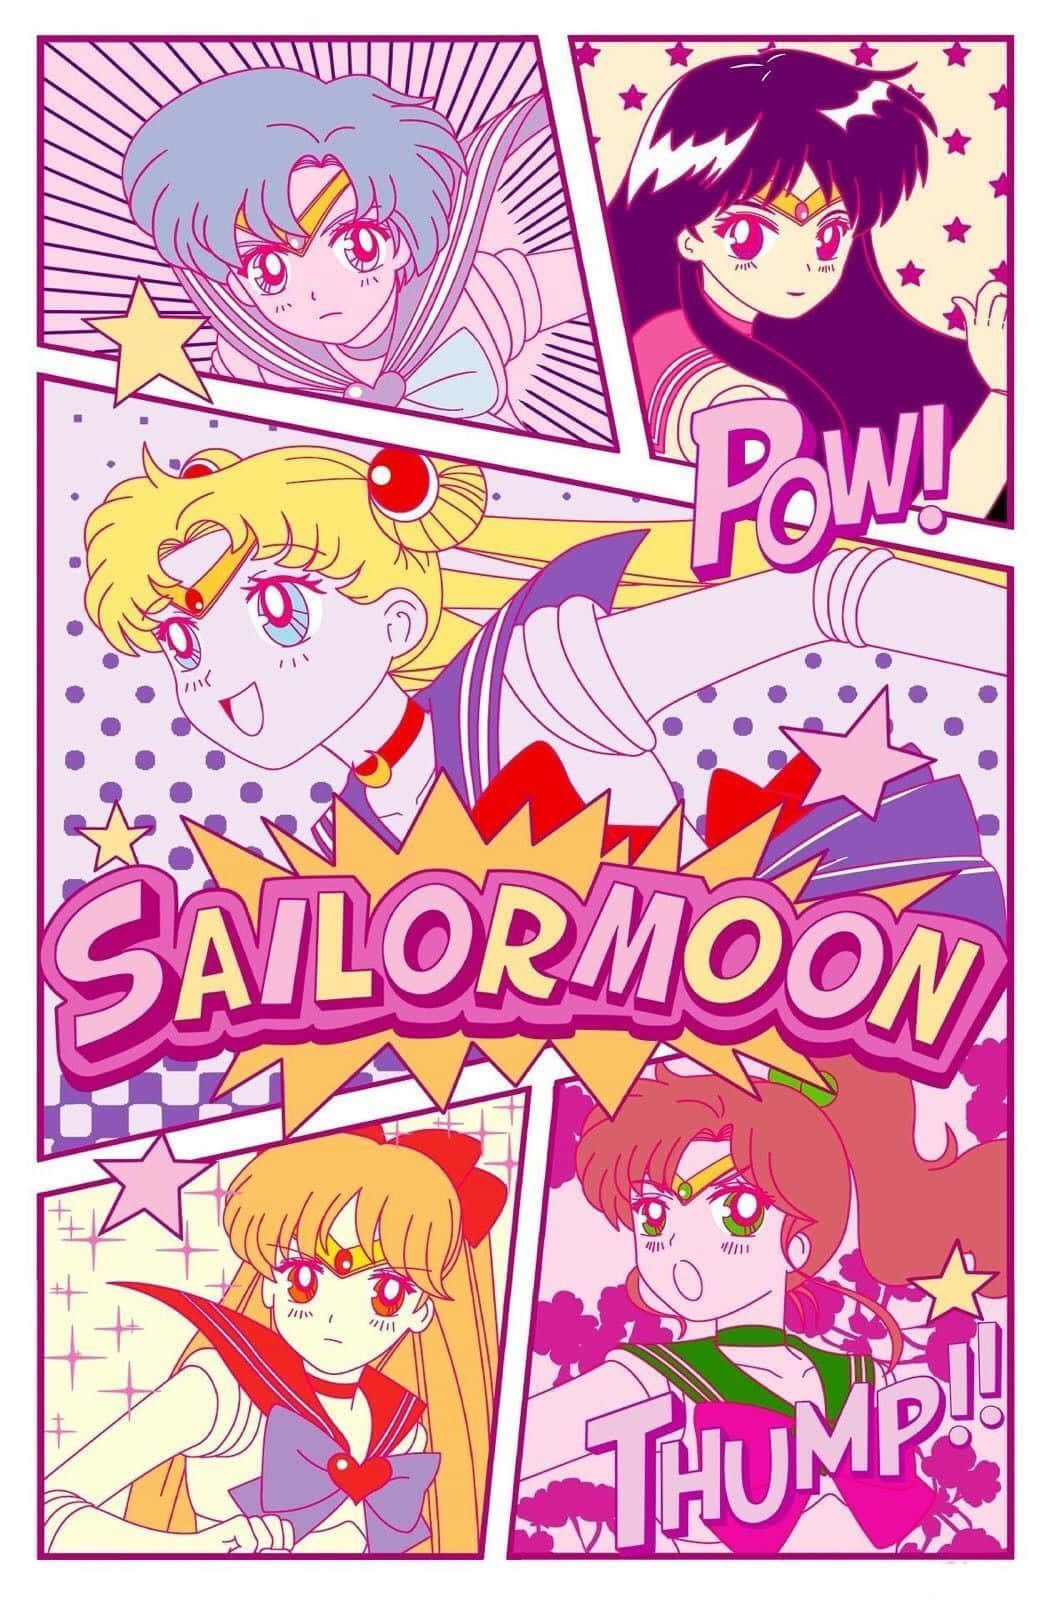 Sailor Moon Aesthetic wallpaper by Psychoticism  Download on ZEDGE  e3dd